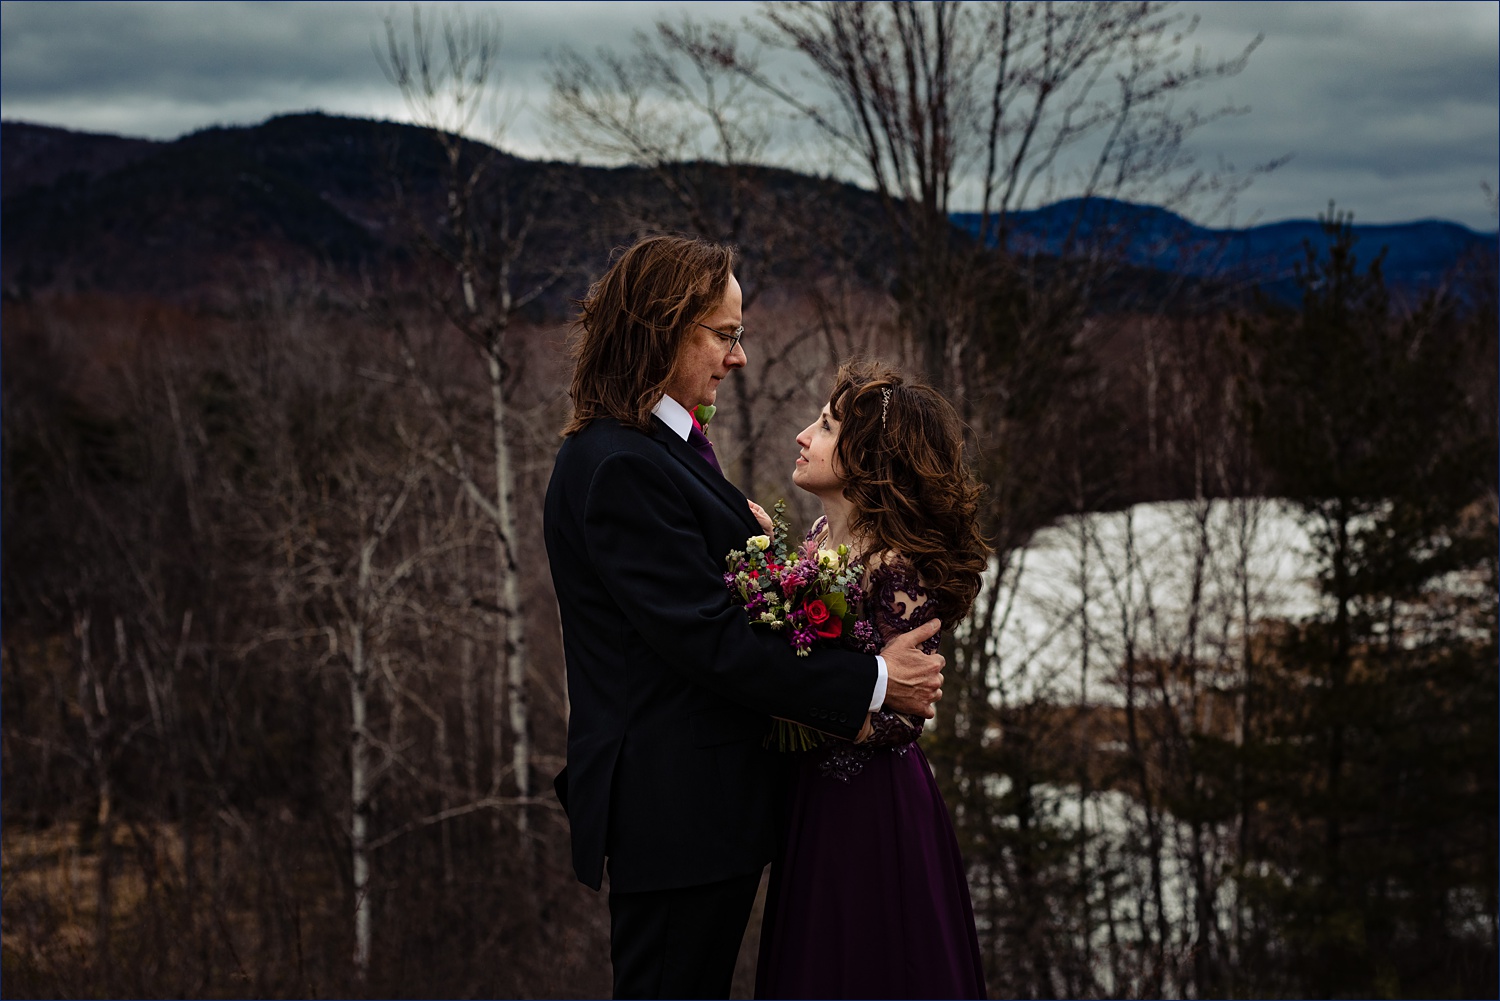 The newlyweds stand against a view of the White Mountains after their New Hampshire elopement in the Spring